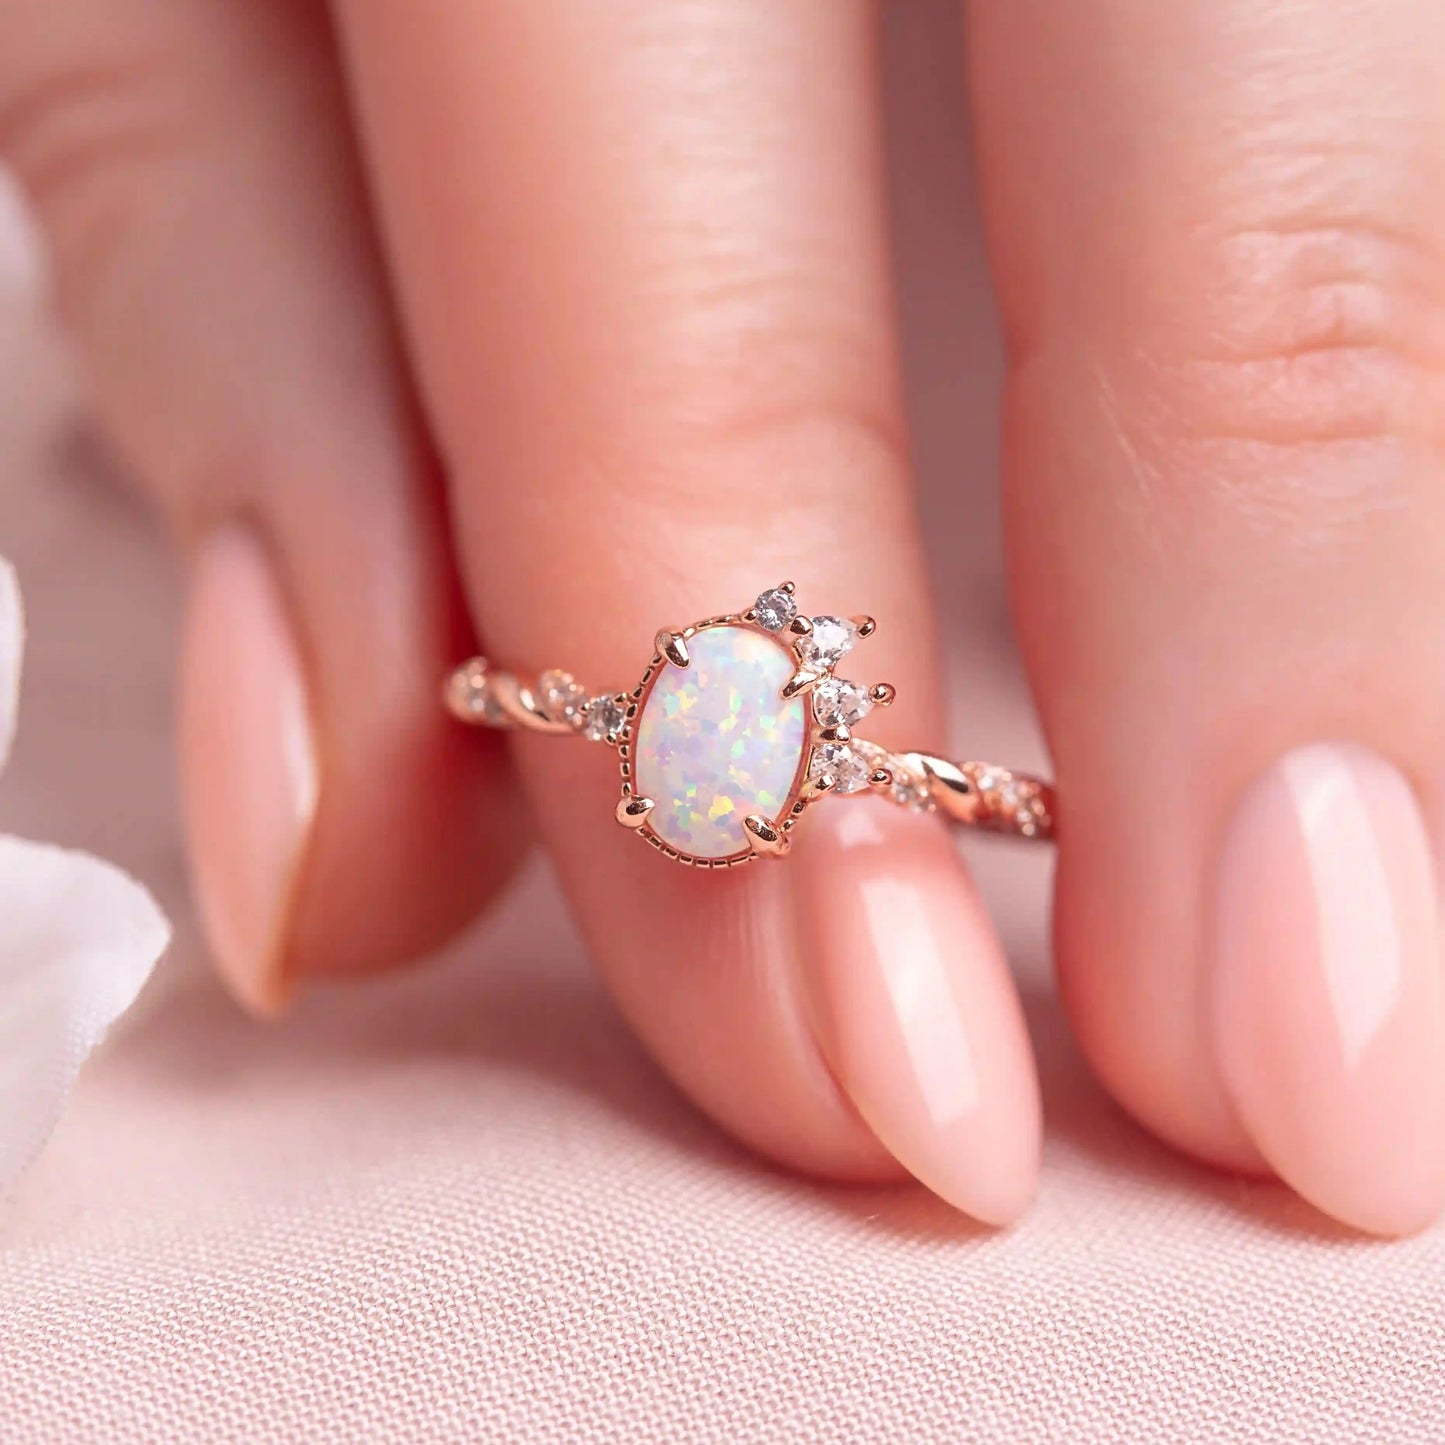 Opal Crown ring on a woman's finger